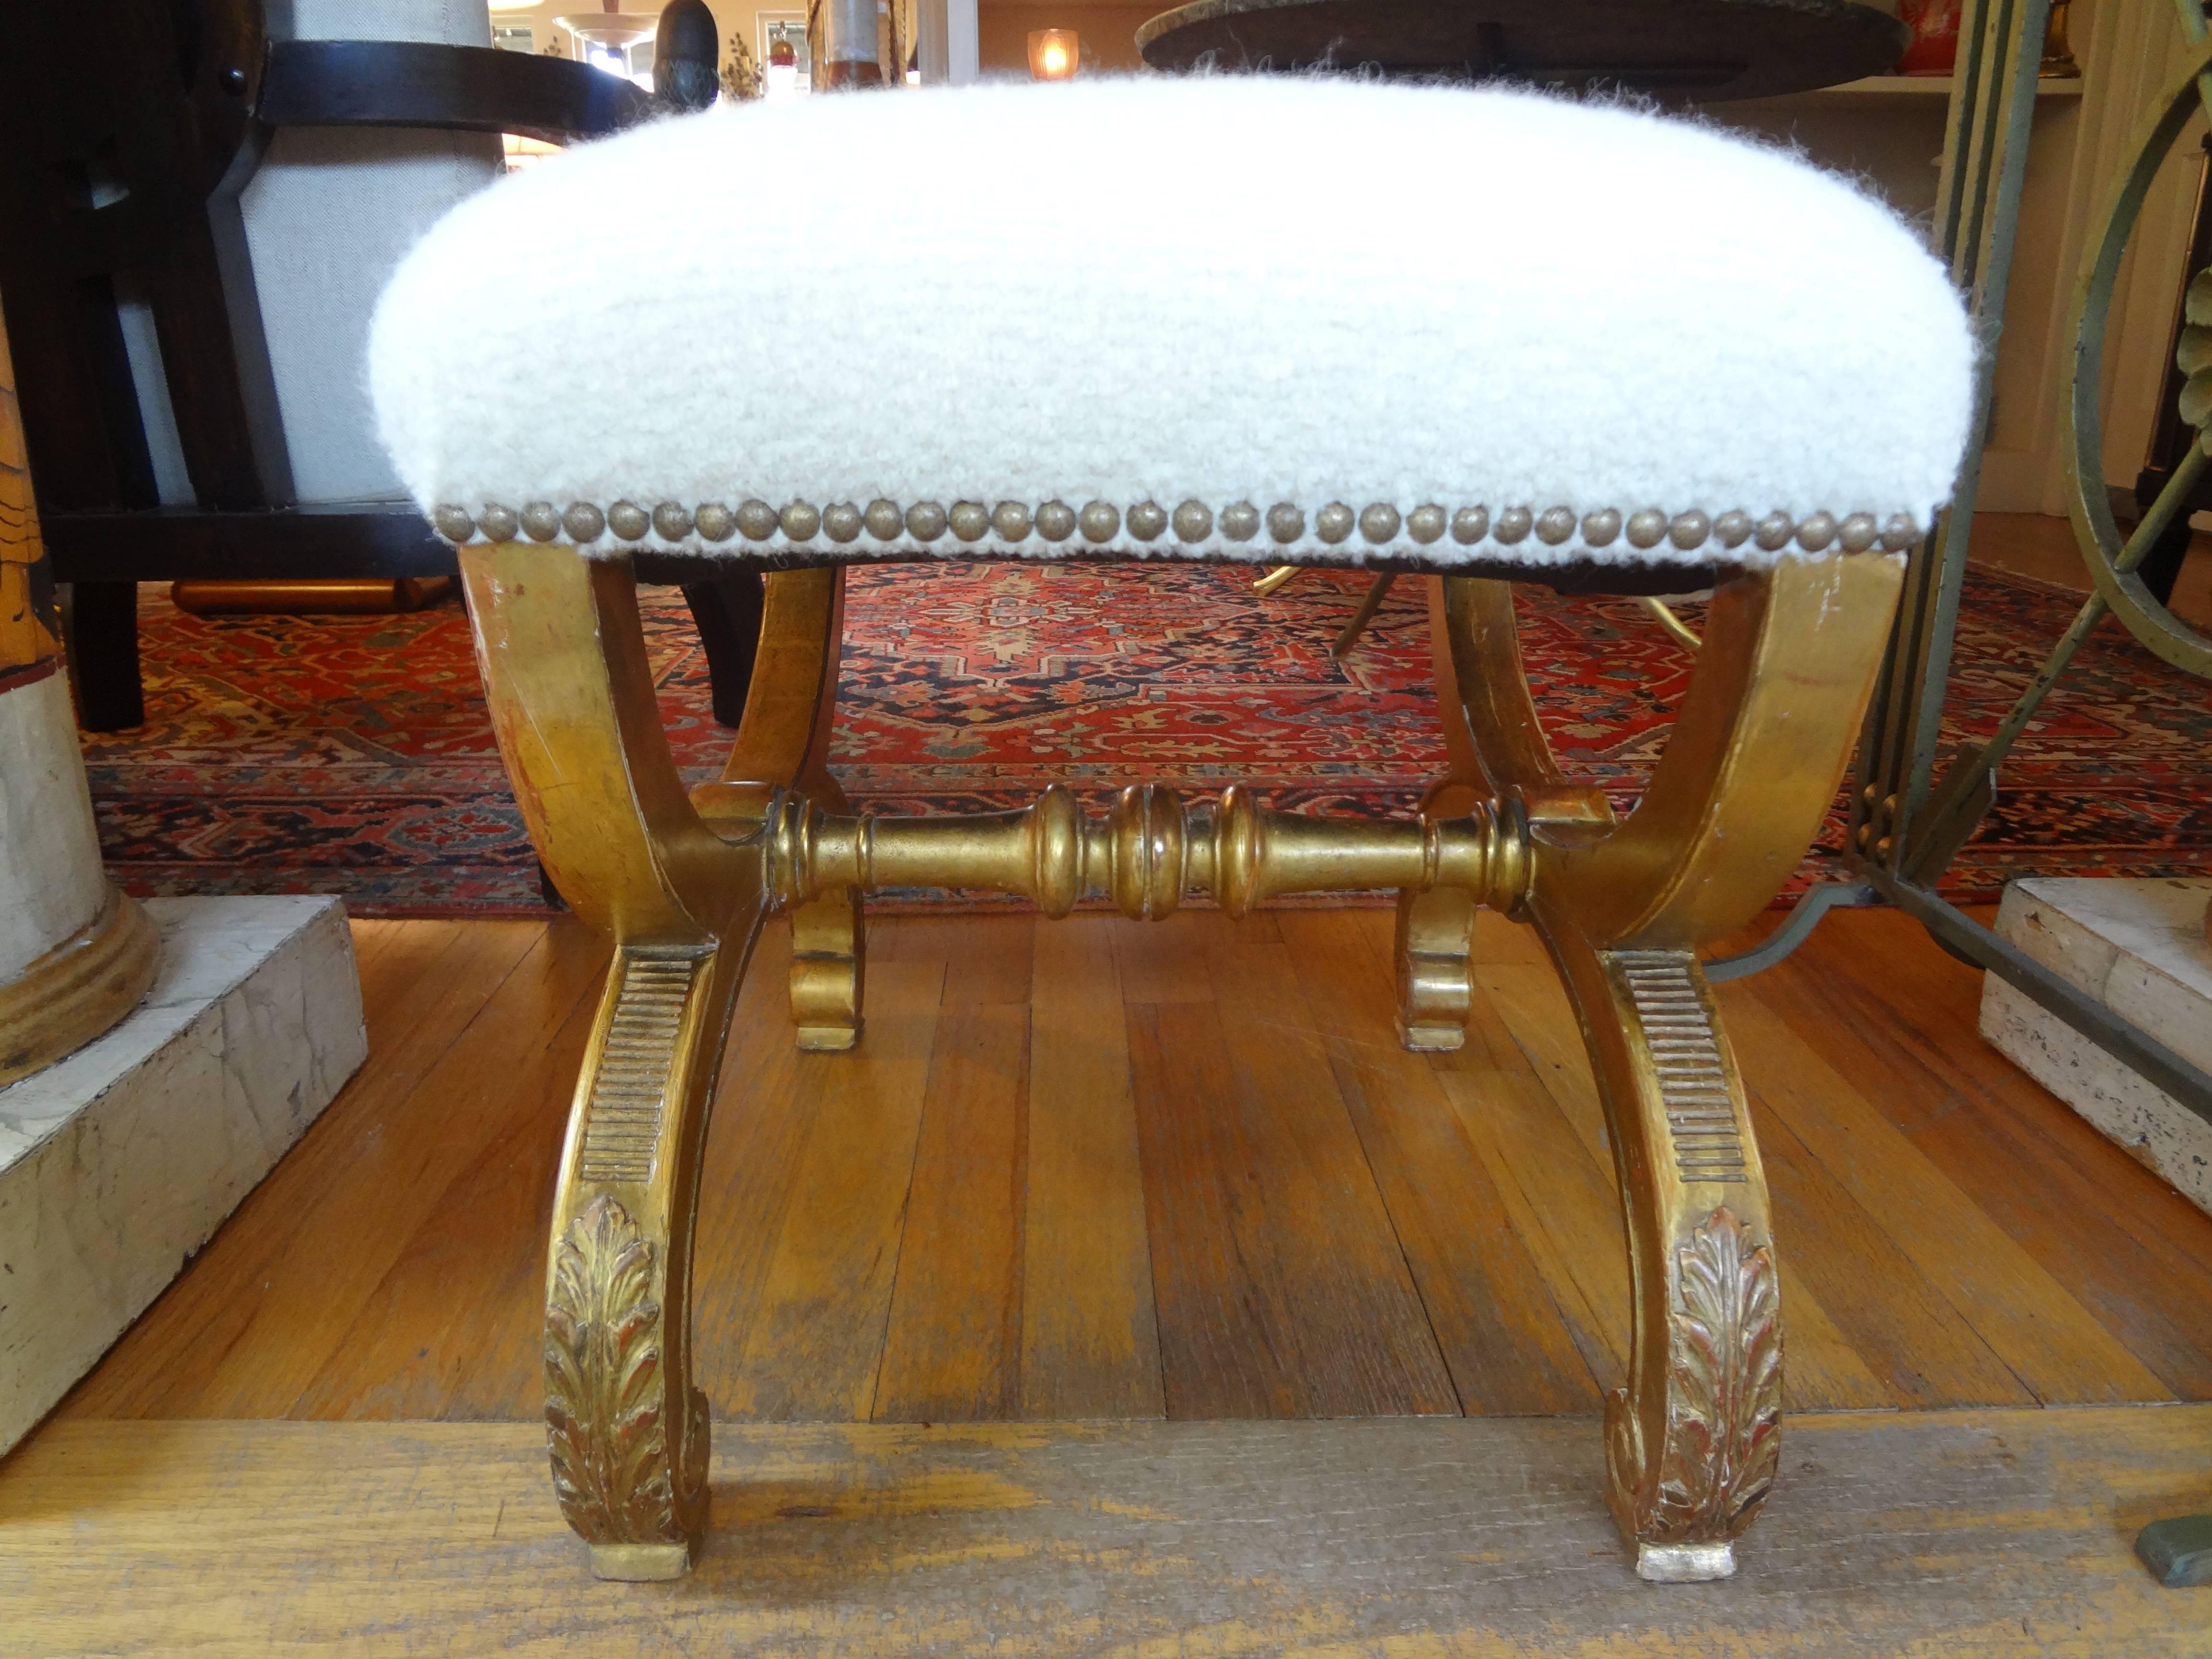 Lovely antique French Louis XVI style giltwood bench, curule stool or tabouret taken down to frame and professionally reupholstered in a white nubby cotton fabric with brass nailhead detail.